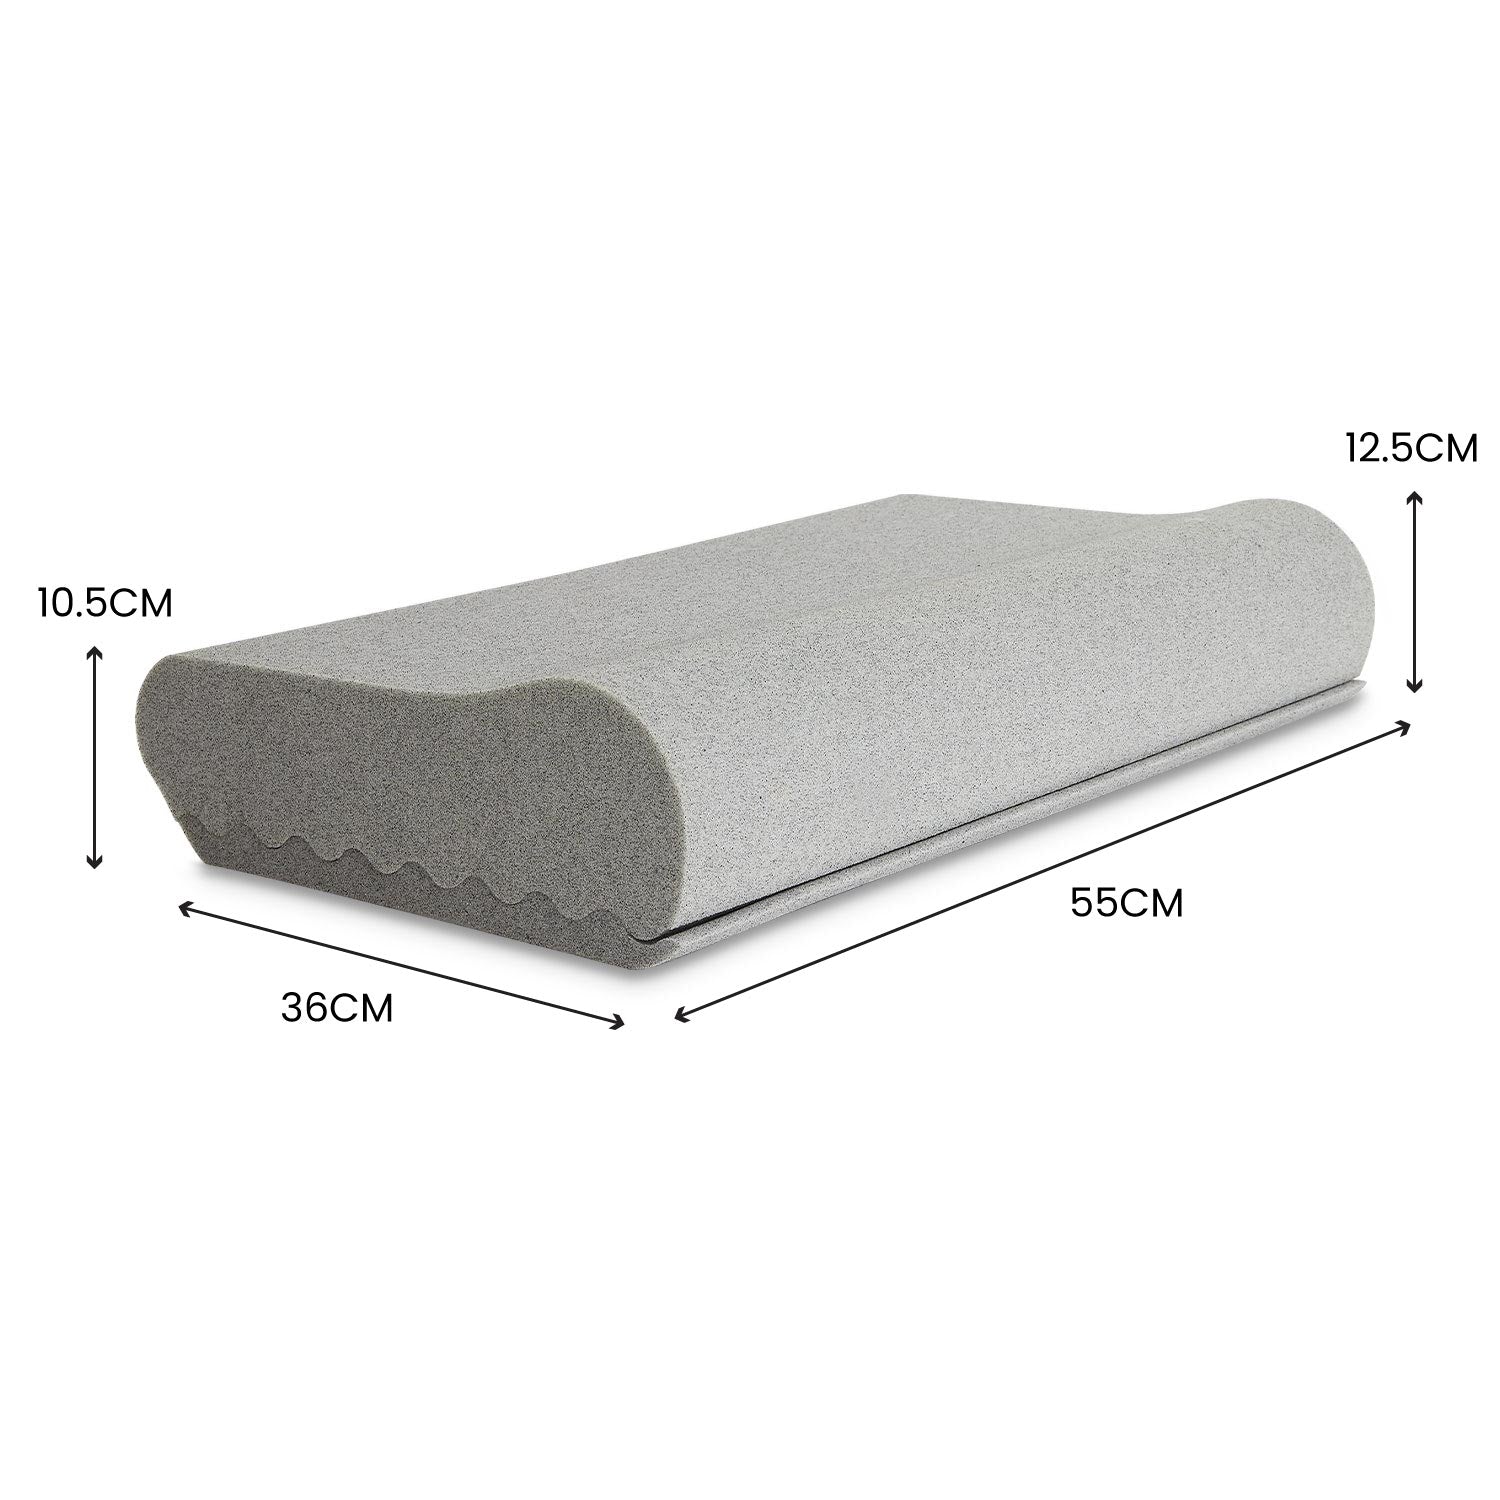 Somna Medica Graphite Infused Gentle Contour Adjustable Pillow - Mattress & Pillow SciencePillows